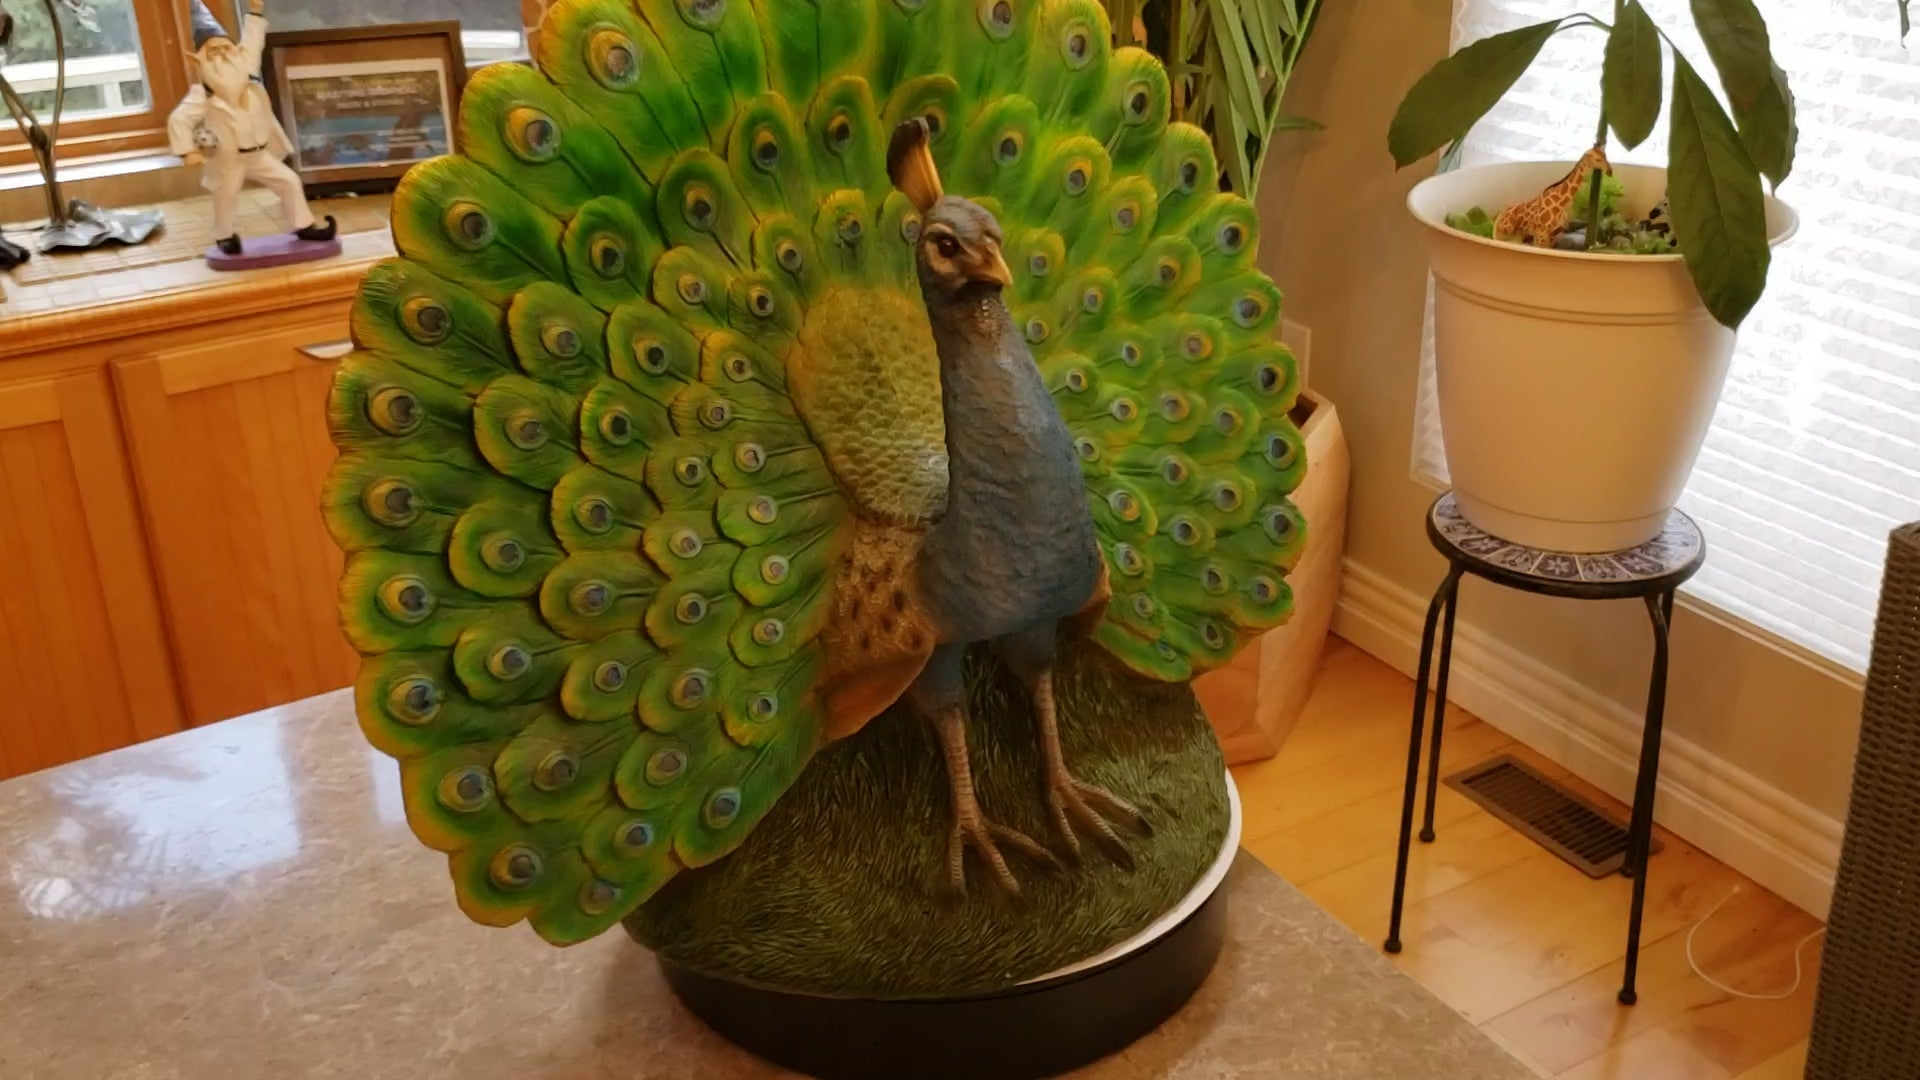 Auction for sale peacock statue